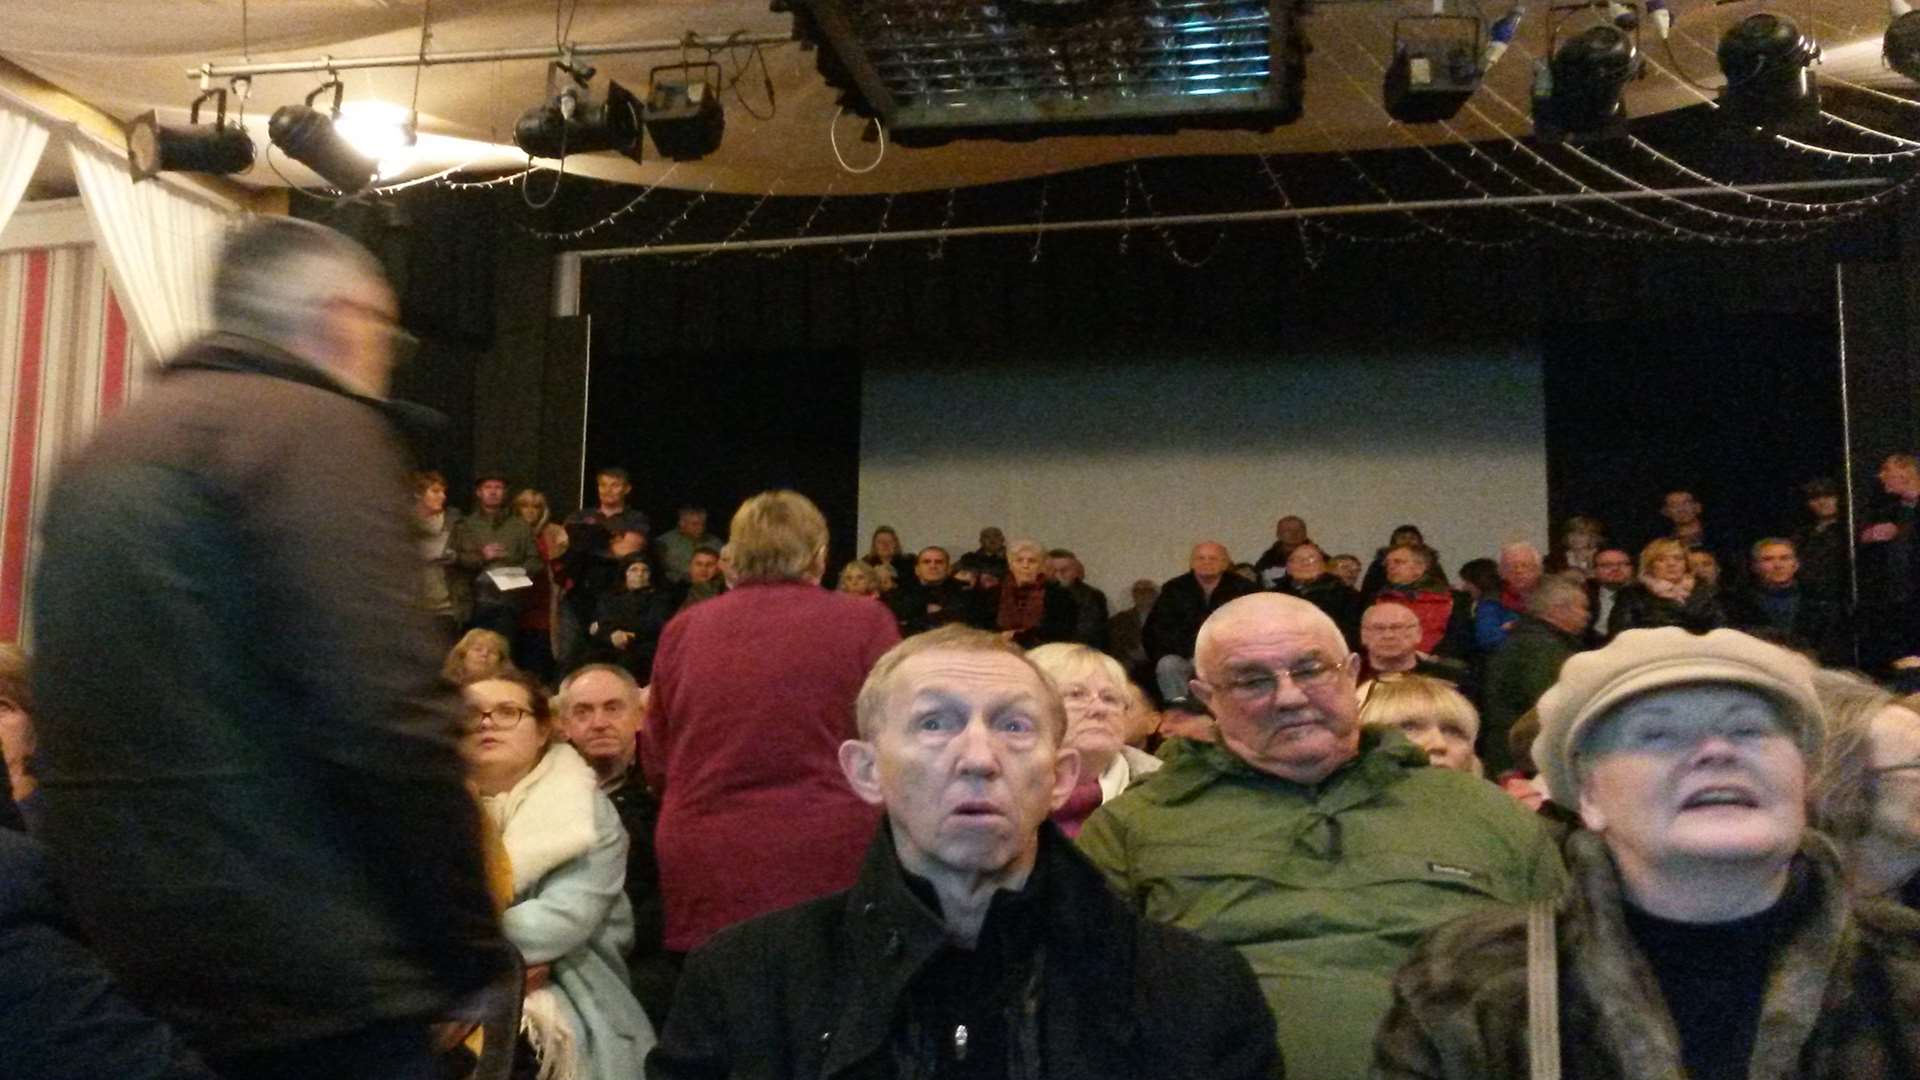 People packed the meeting